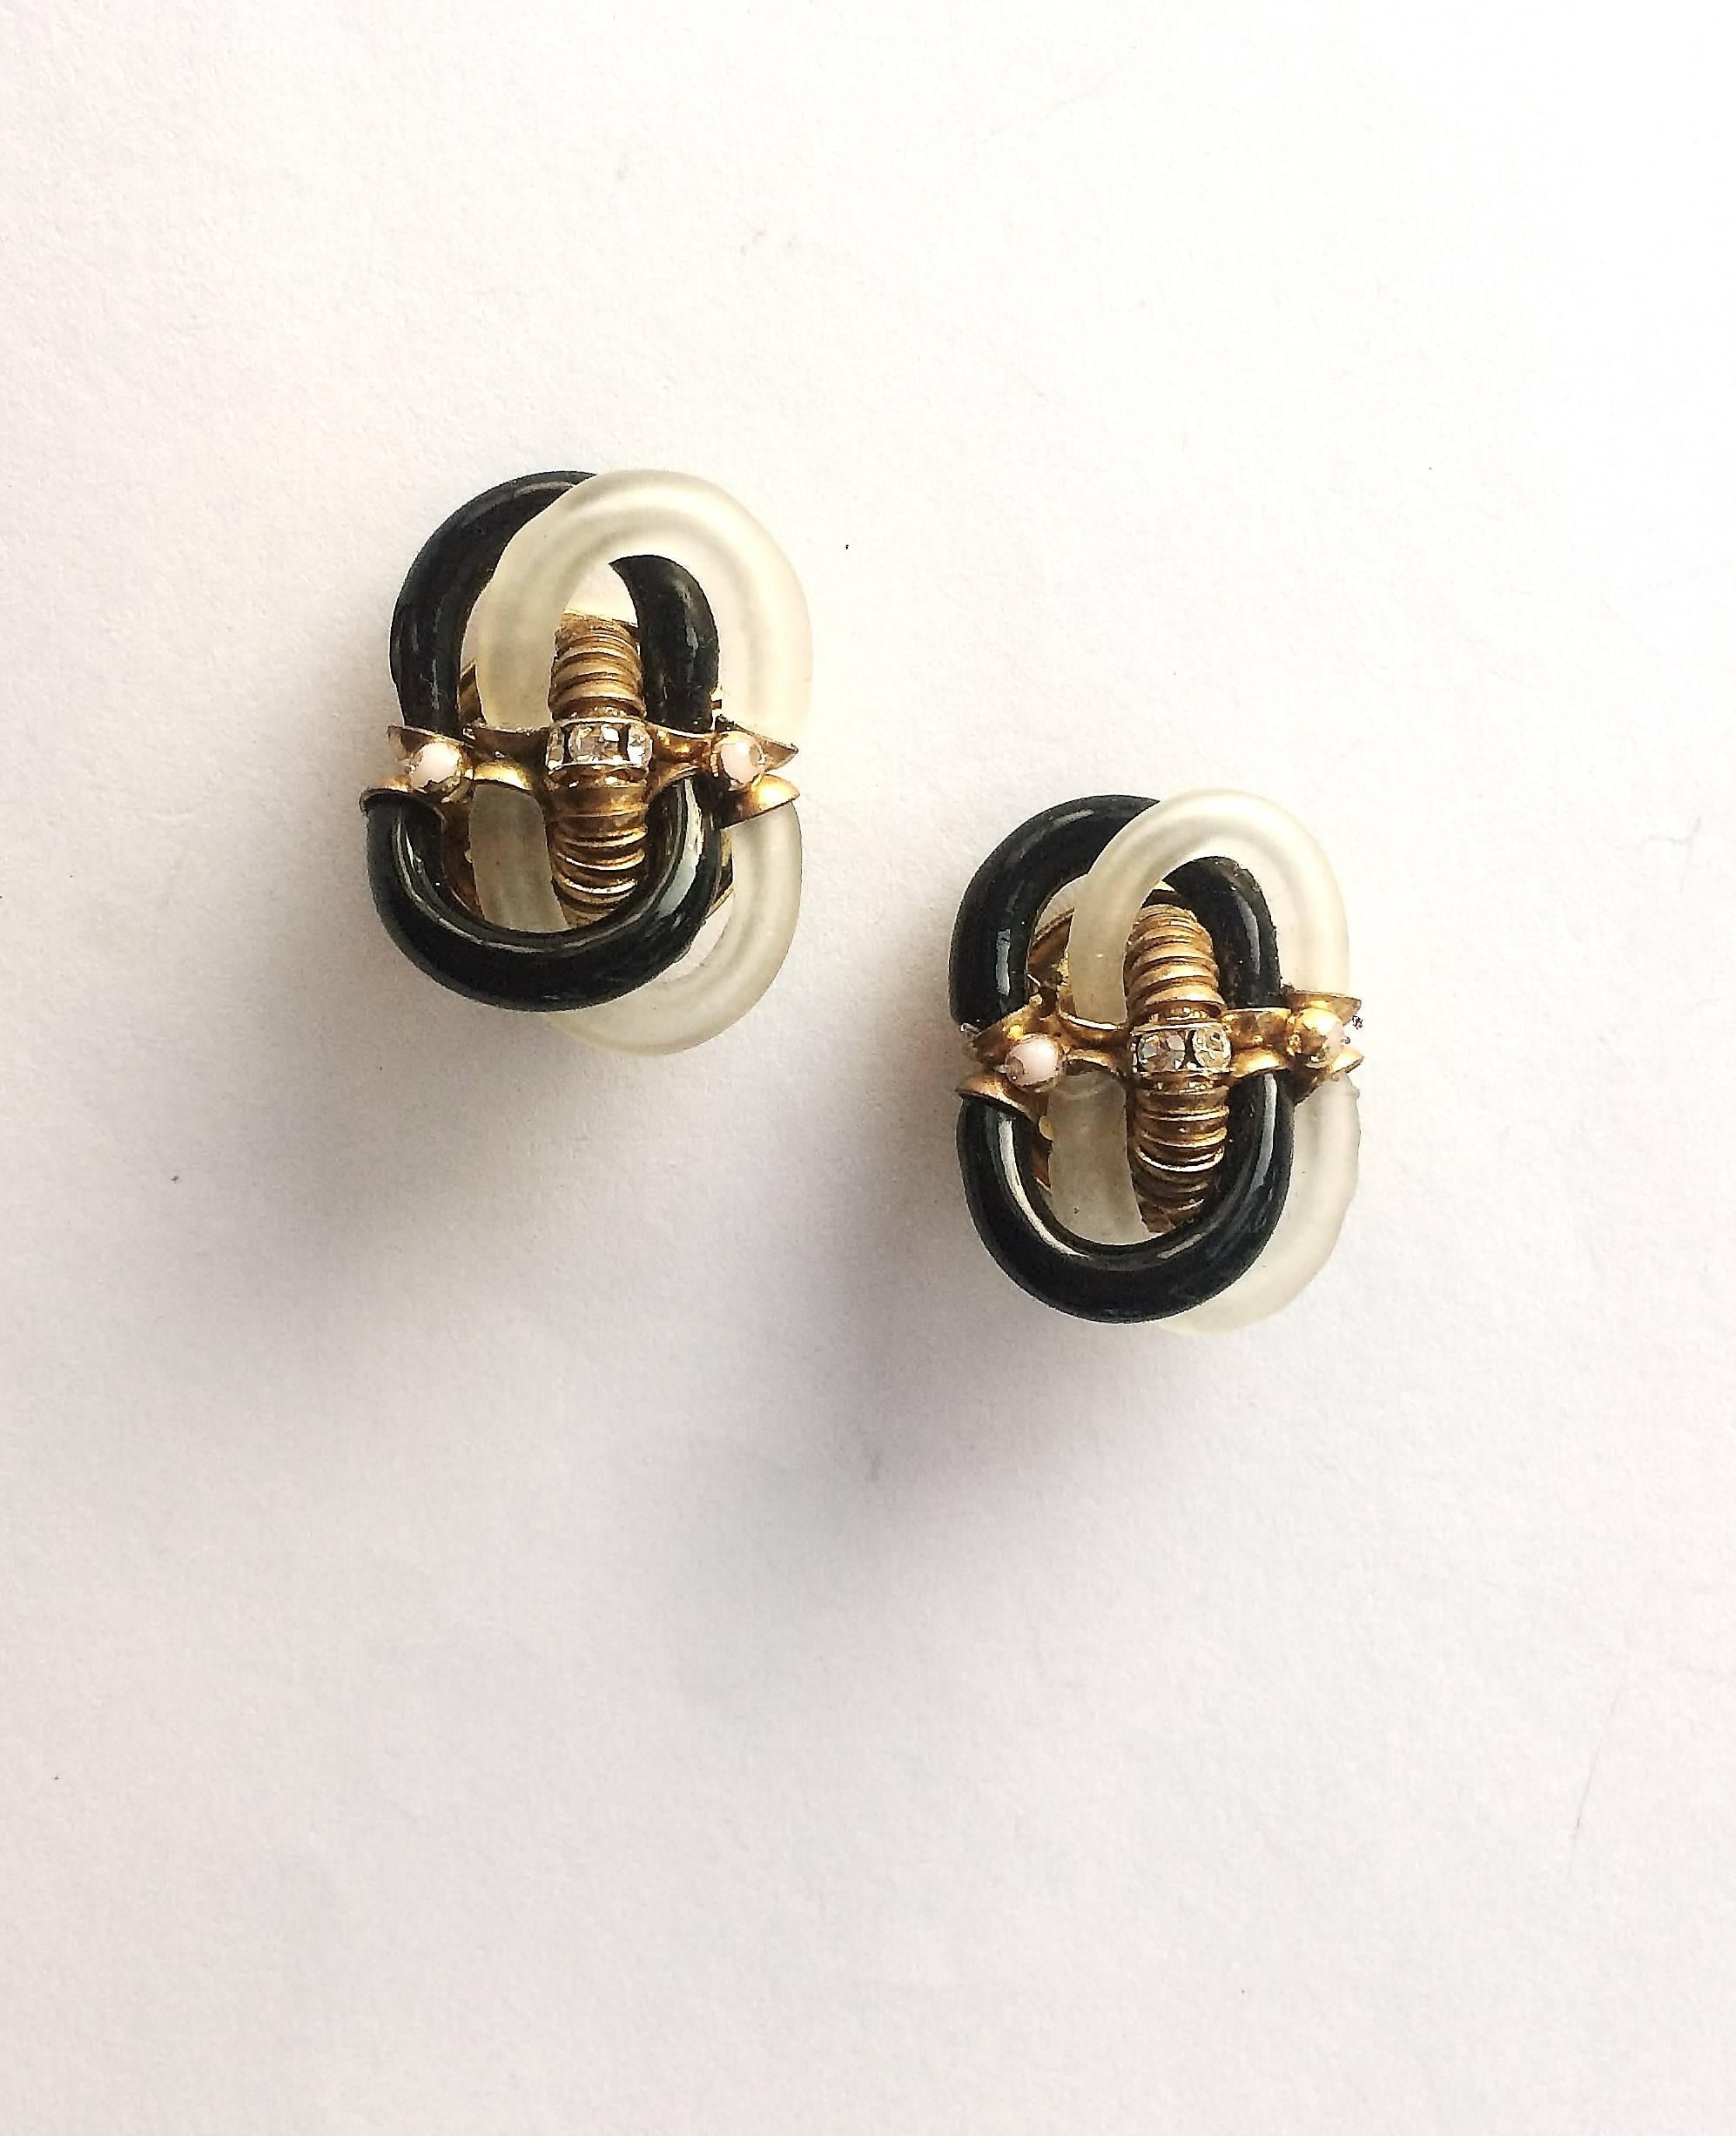 Made by the famous Venetian glass maker Seguso for chanel in the 1970s, these sculptural earrings are constructed of two interlocking curved pieces, in black and frosted glass, with gold and paste highlights. Although unsigned, this is a well known